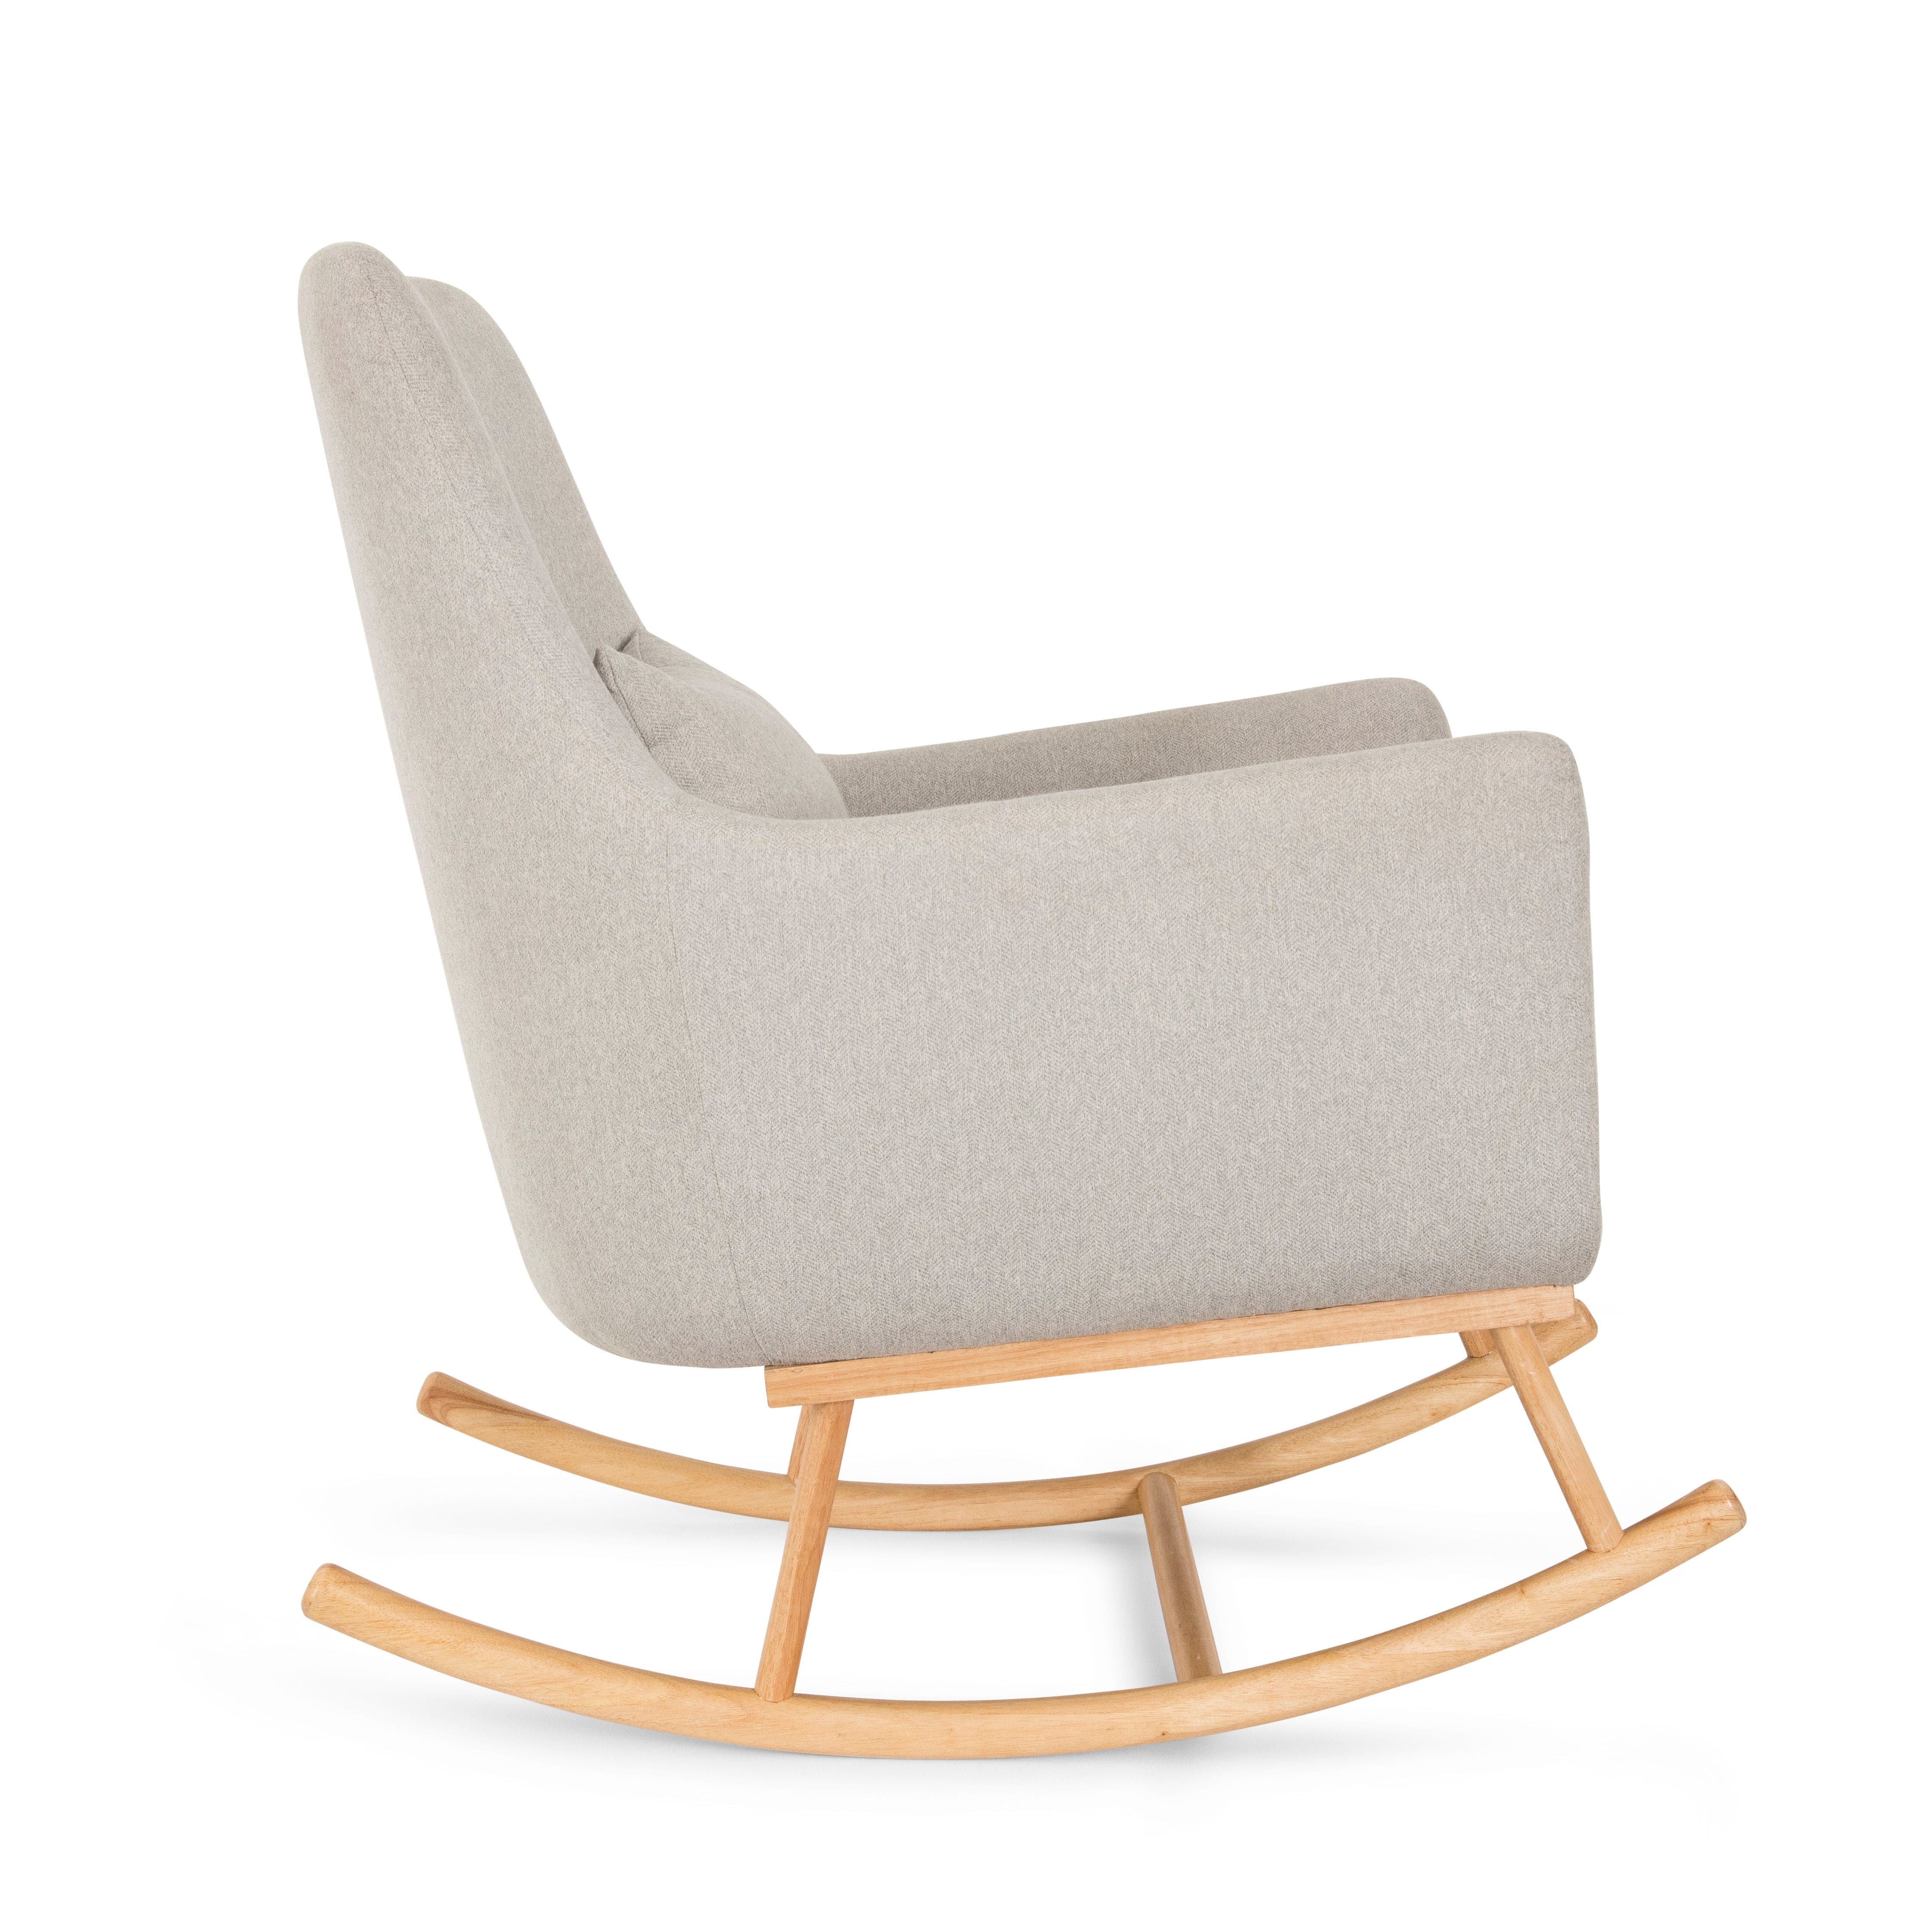 Tutti Bambini Oscar Rocking Chair - Pebble/Grey - For Your Little One